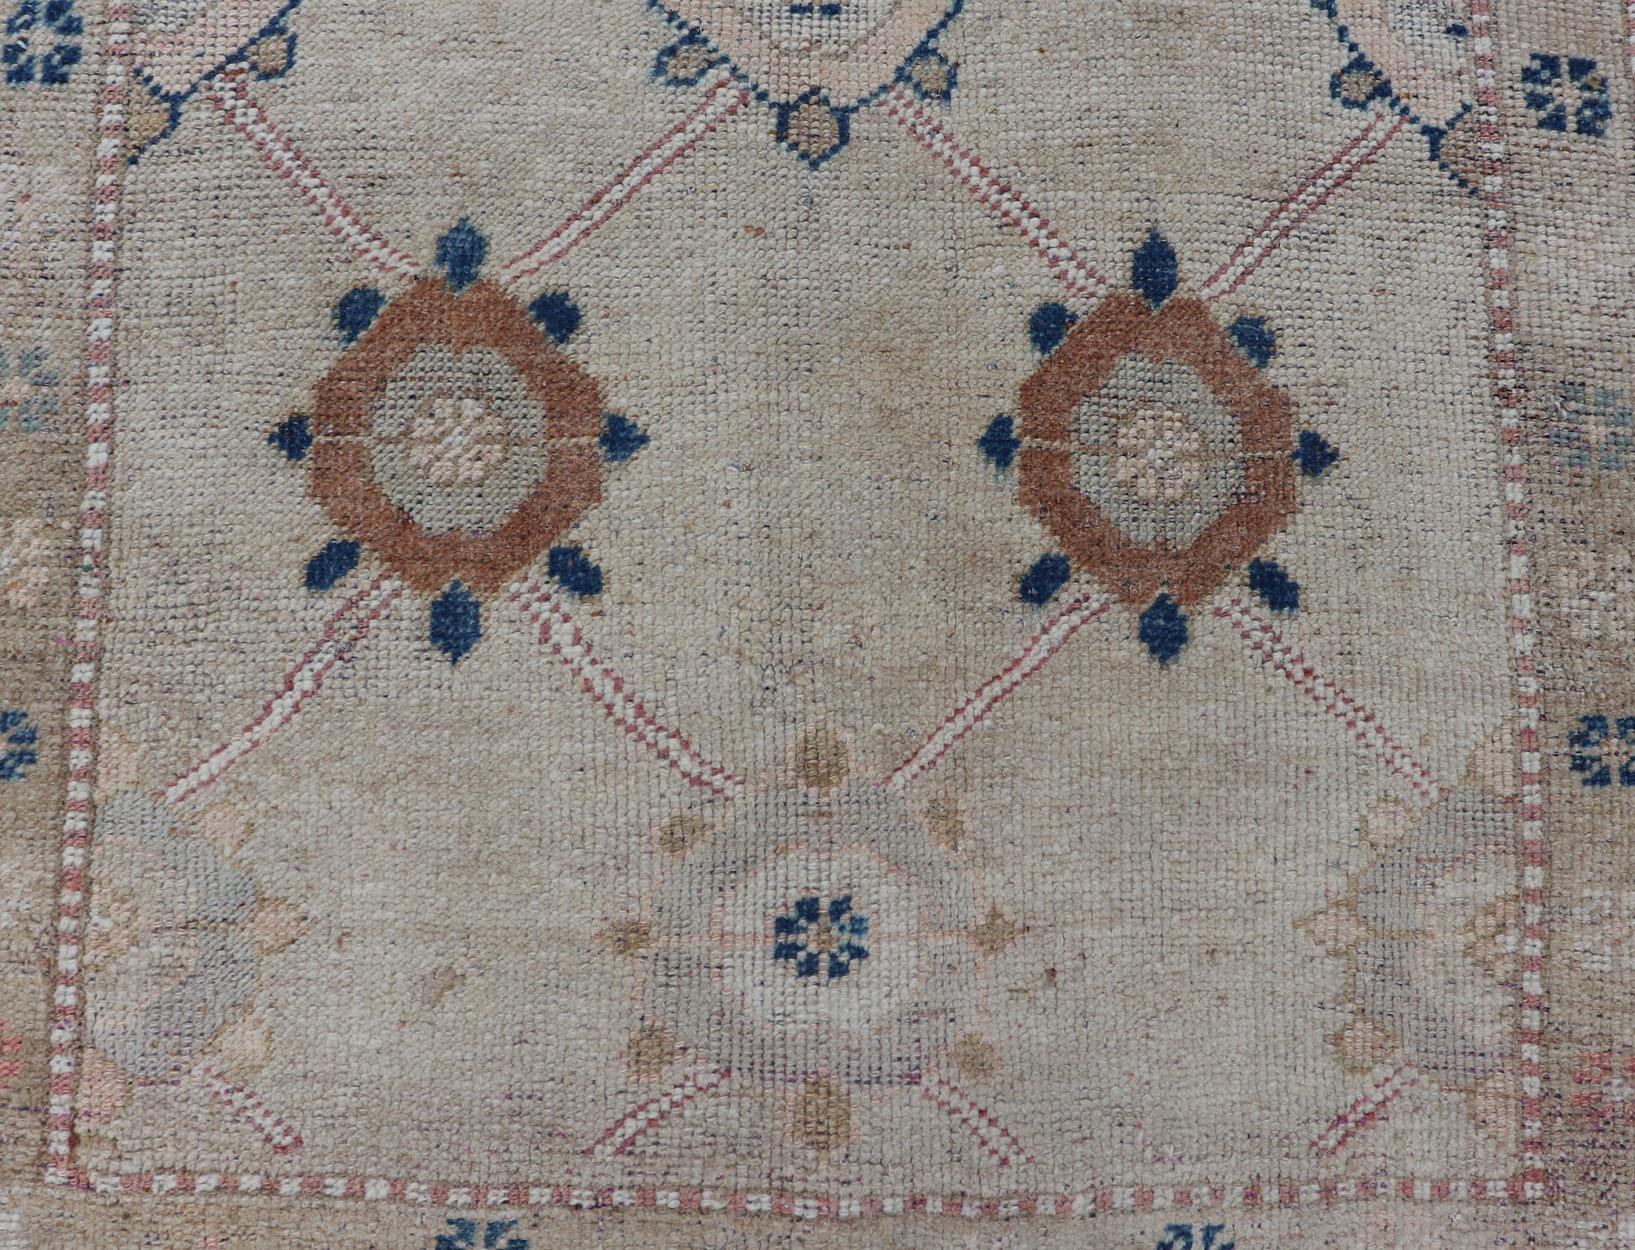 Antique Oushak with sub-geometric design in tan, cream, caramel, pink & blue, turkish Oushak antique rug with open field design, Keivan Woven Arts / rug / EN-P13321, country of origin / type: Turkey / Oushak, circa Early-20th century.

Measures: